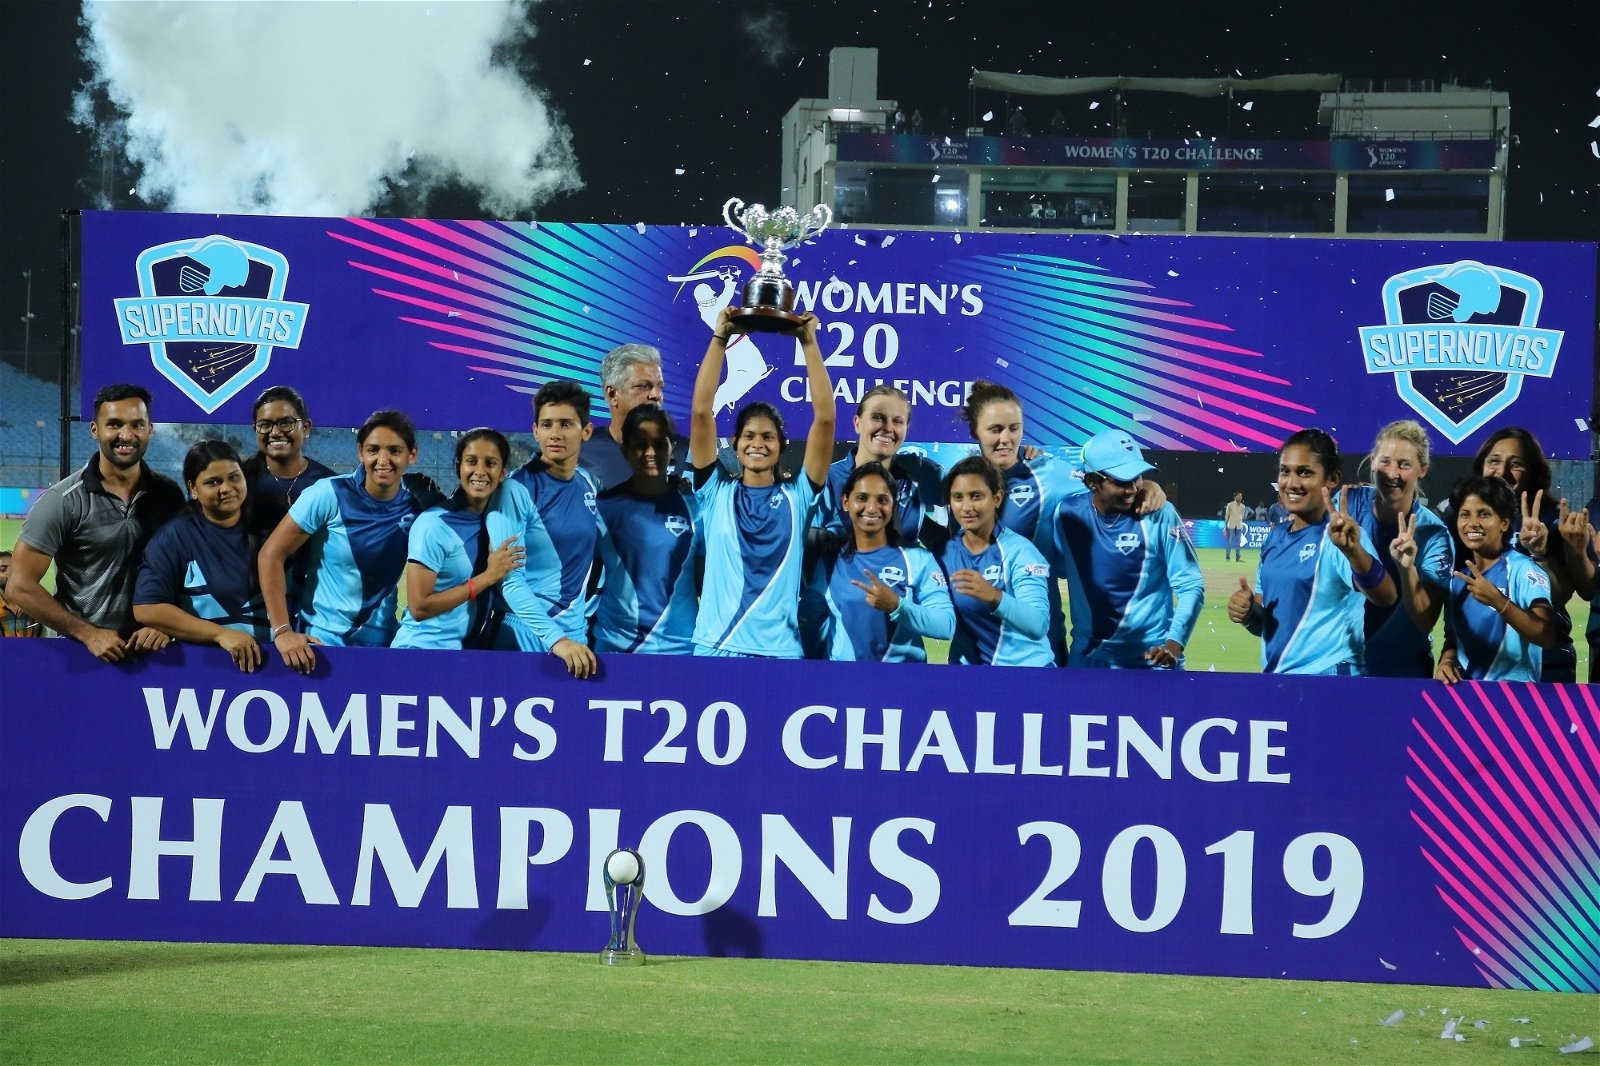 Jaipur: Supernovas pose with the trophy after winning the final match of Women's T20 Challenge 2019 against Velocity at Sawai Mansingh Stadium in Jaipur, on May 11, 2019. (Photo: IANS)